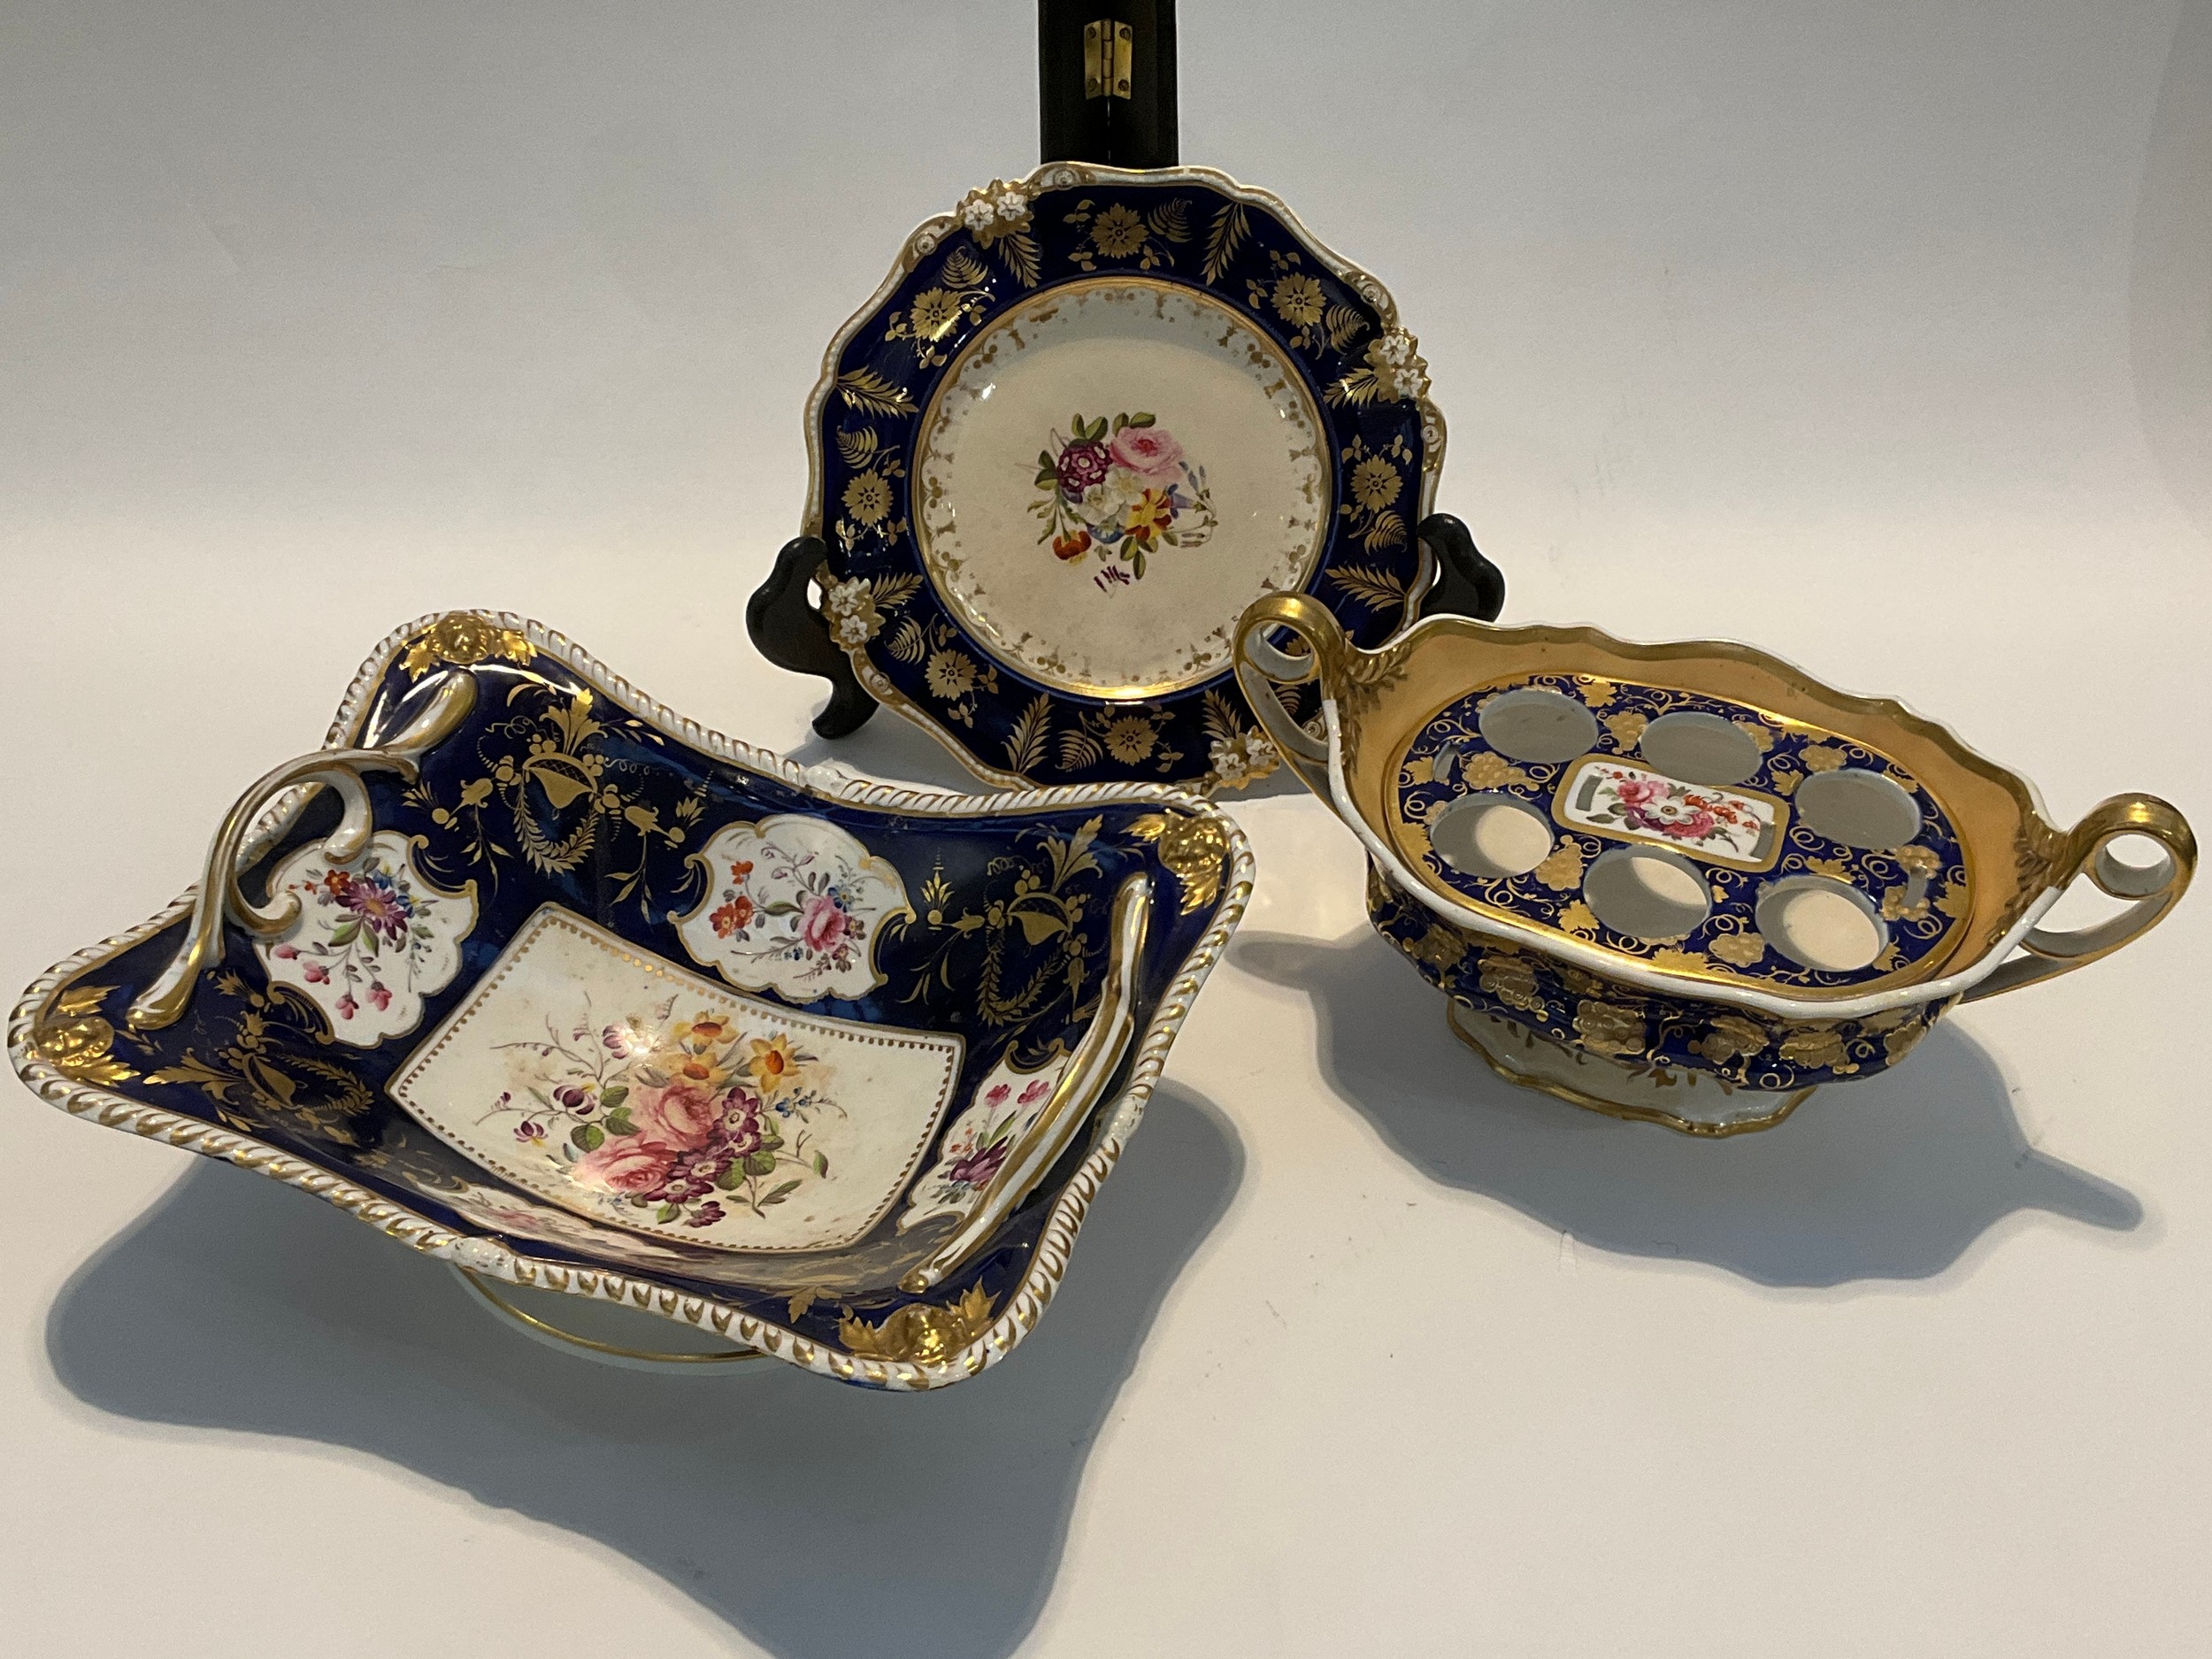 A quantity of Bloor Derby table wares, cobalt and gilt design, including centrepiece bowl, lidded